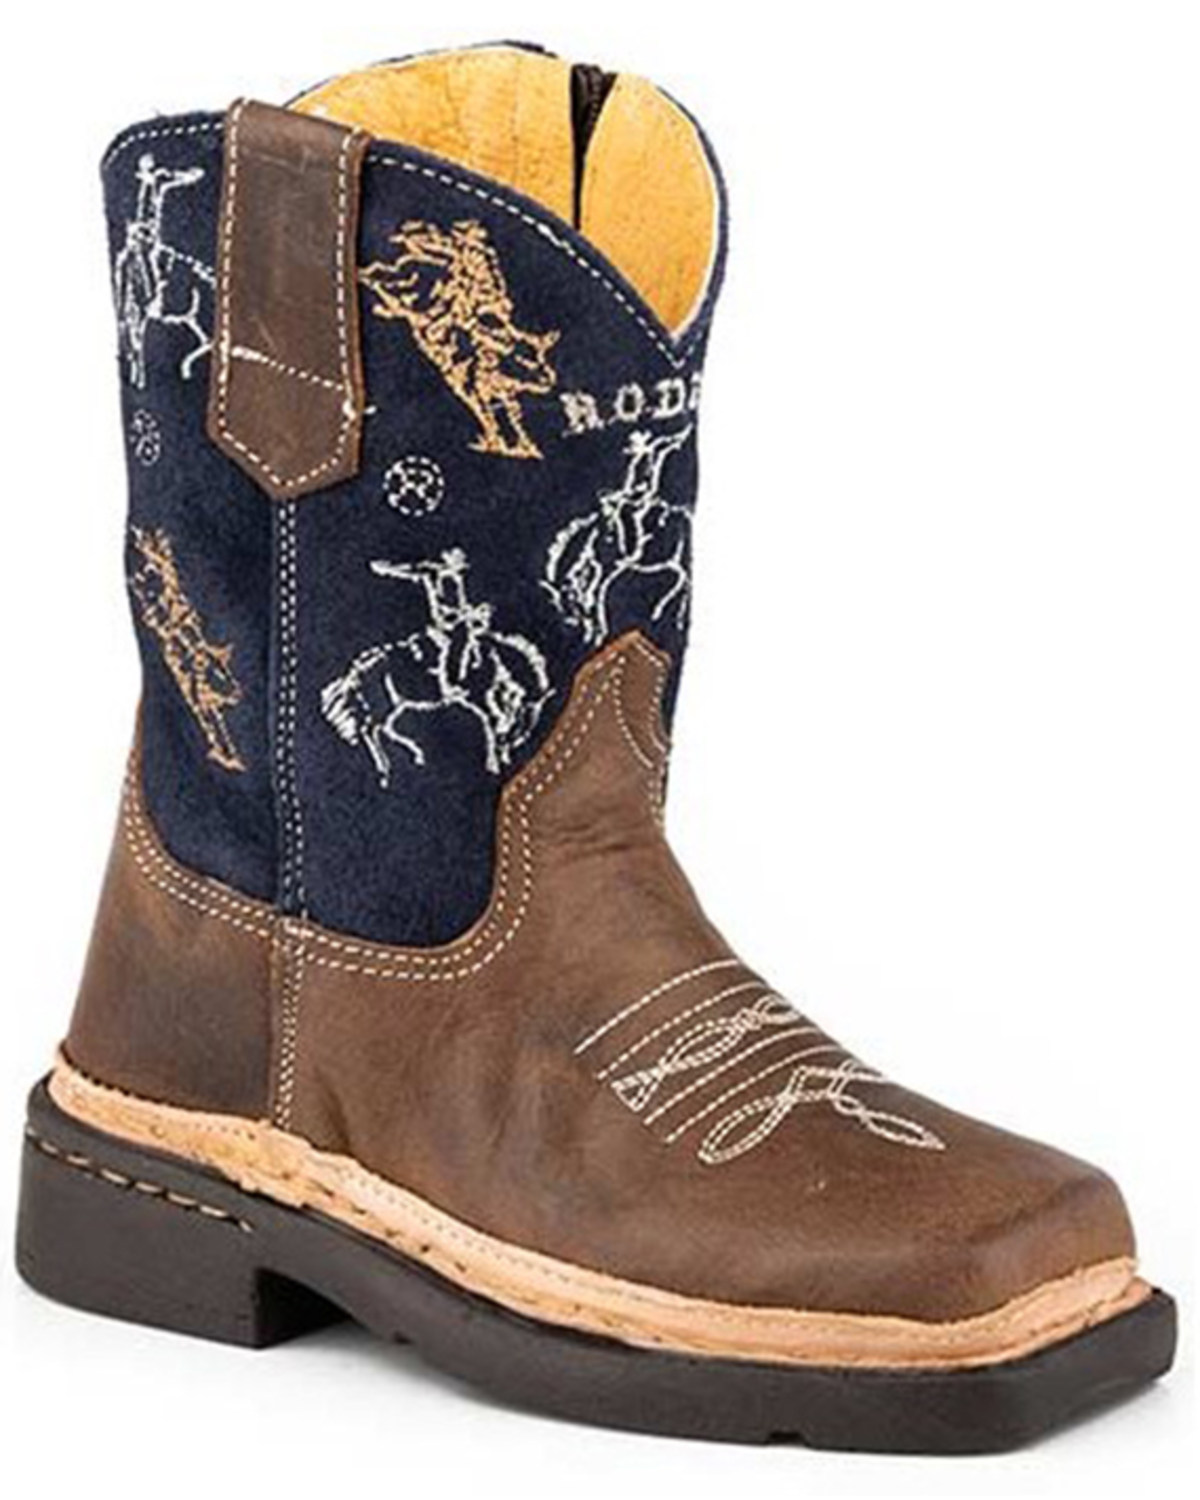 Roper Toddler Boys' Roughstock Western Boots - Square Toe